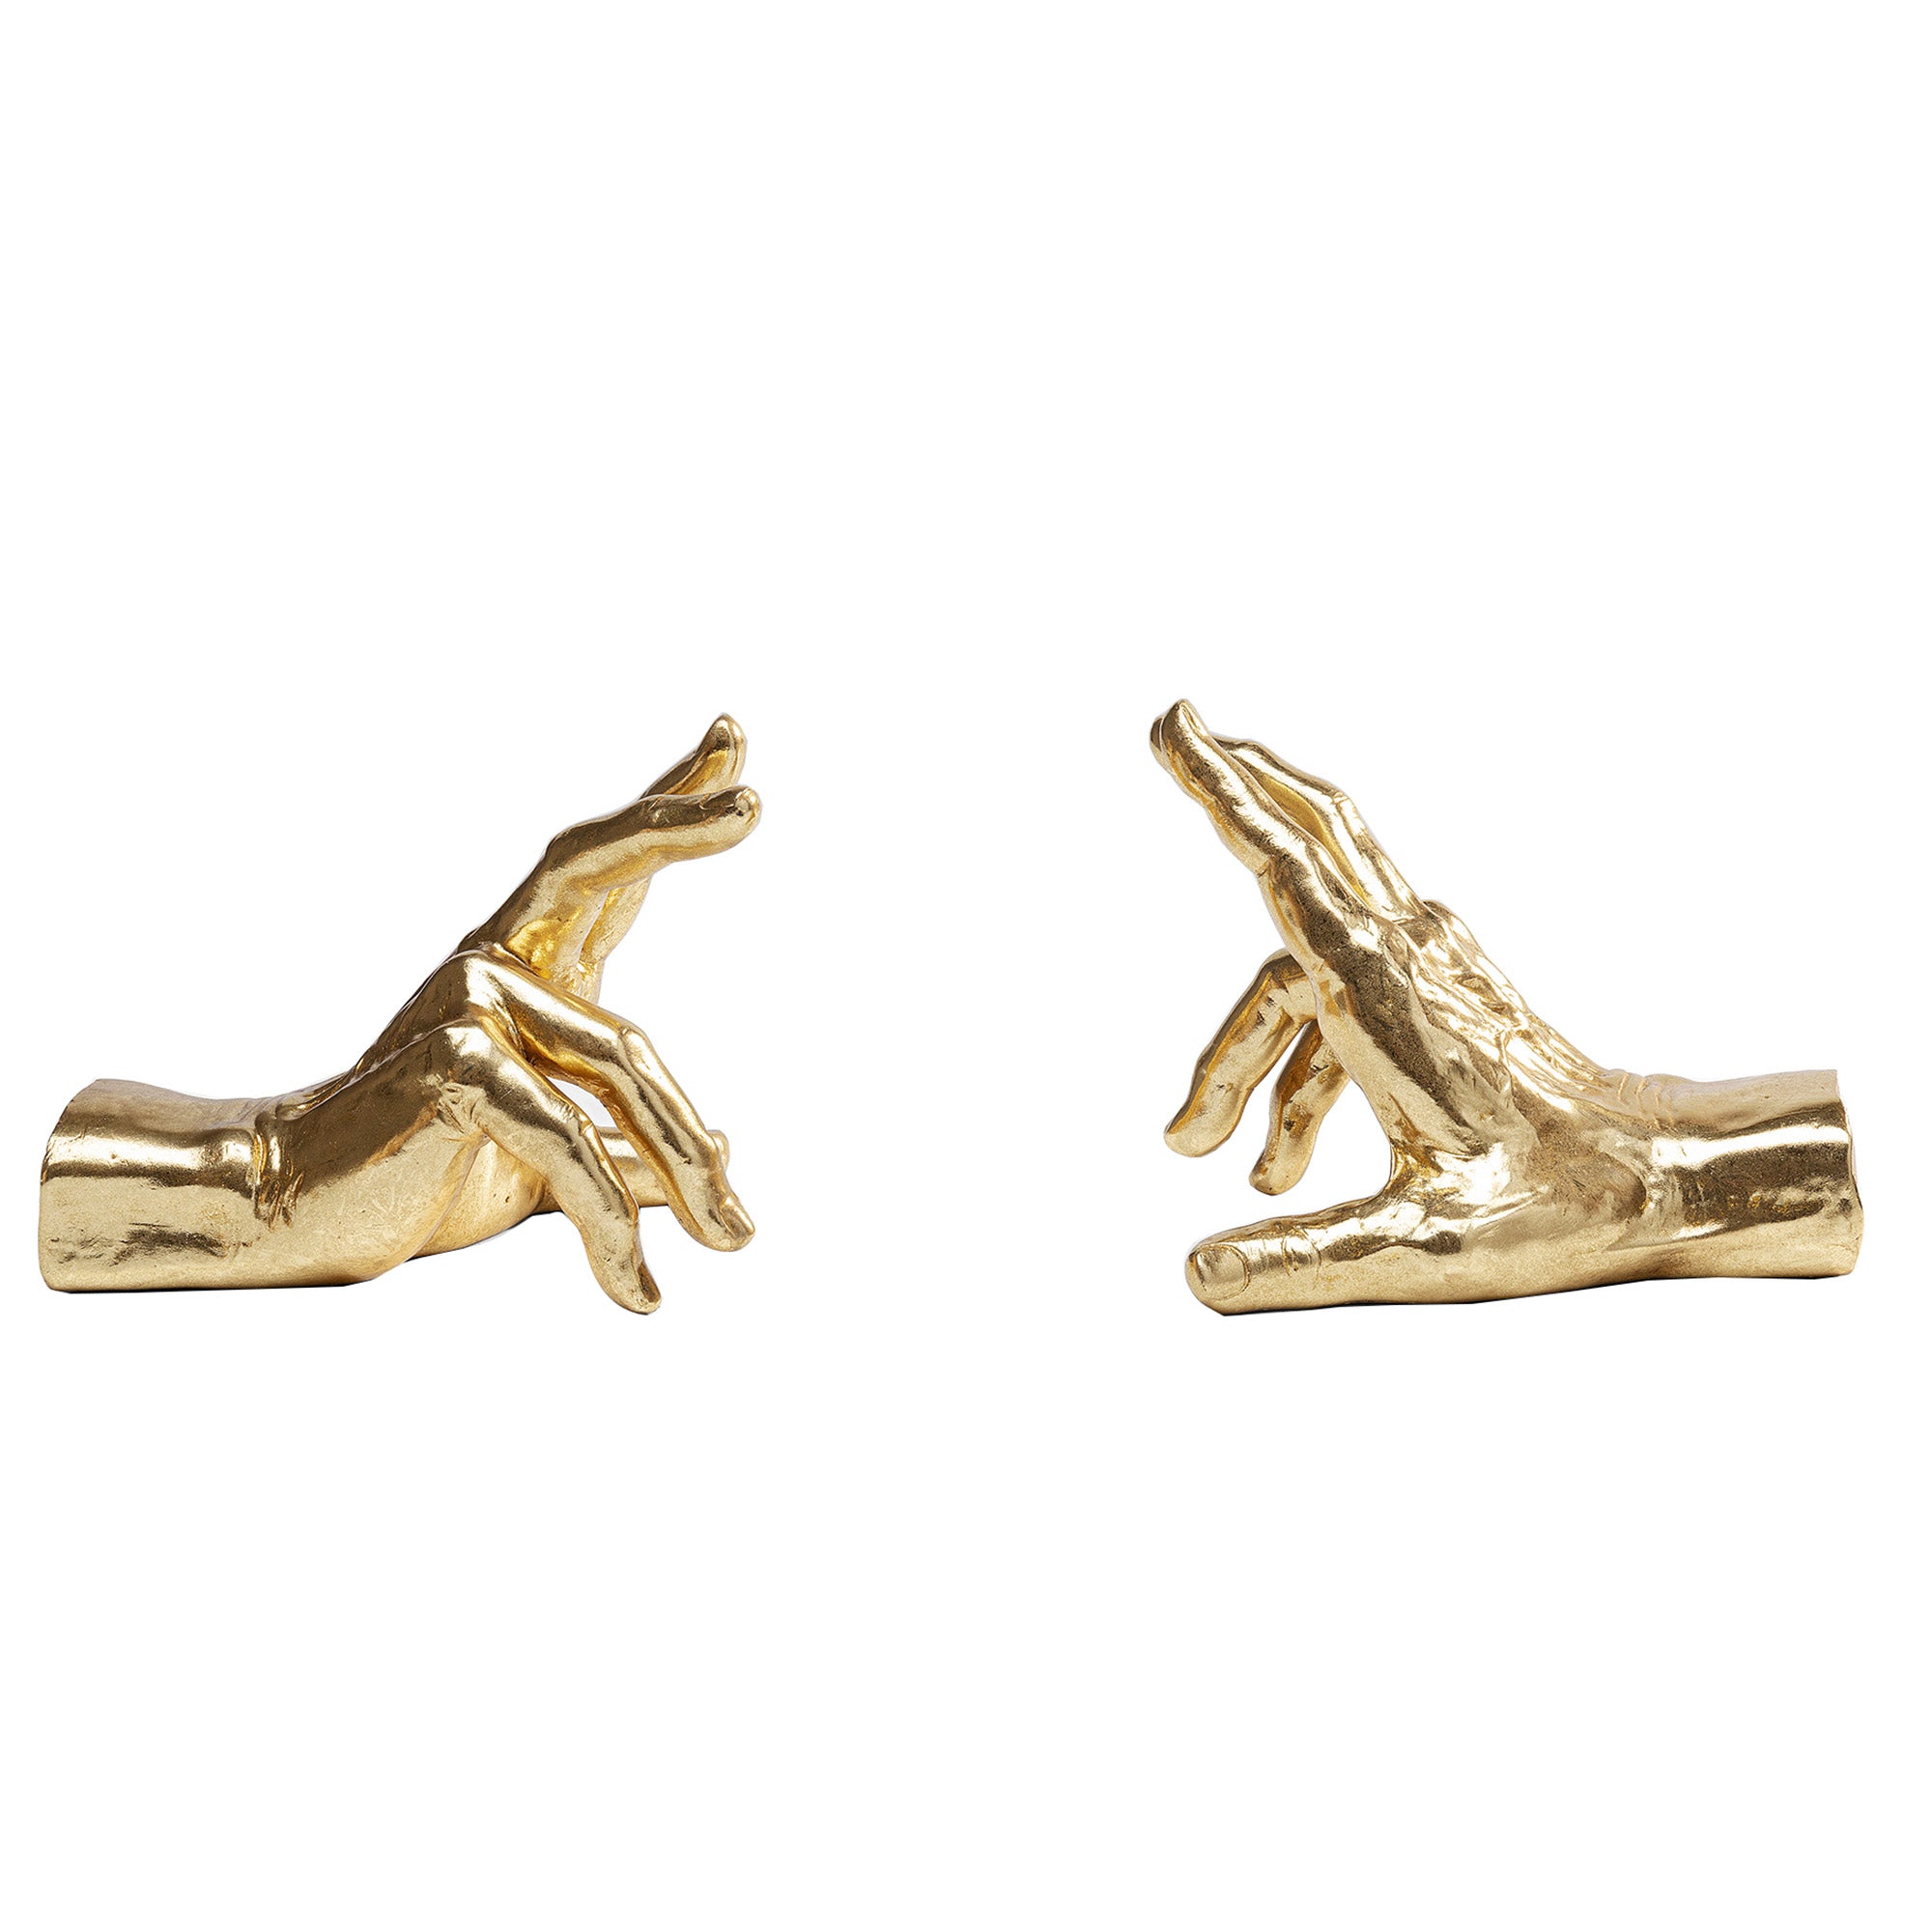 Supporting Hands Bookend - Set of 2